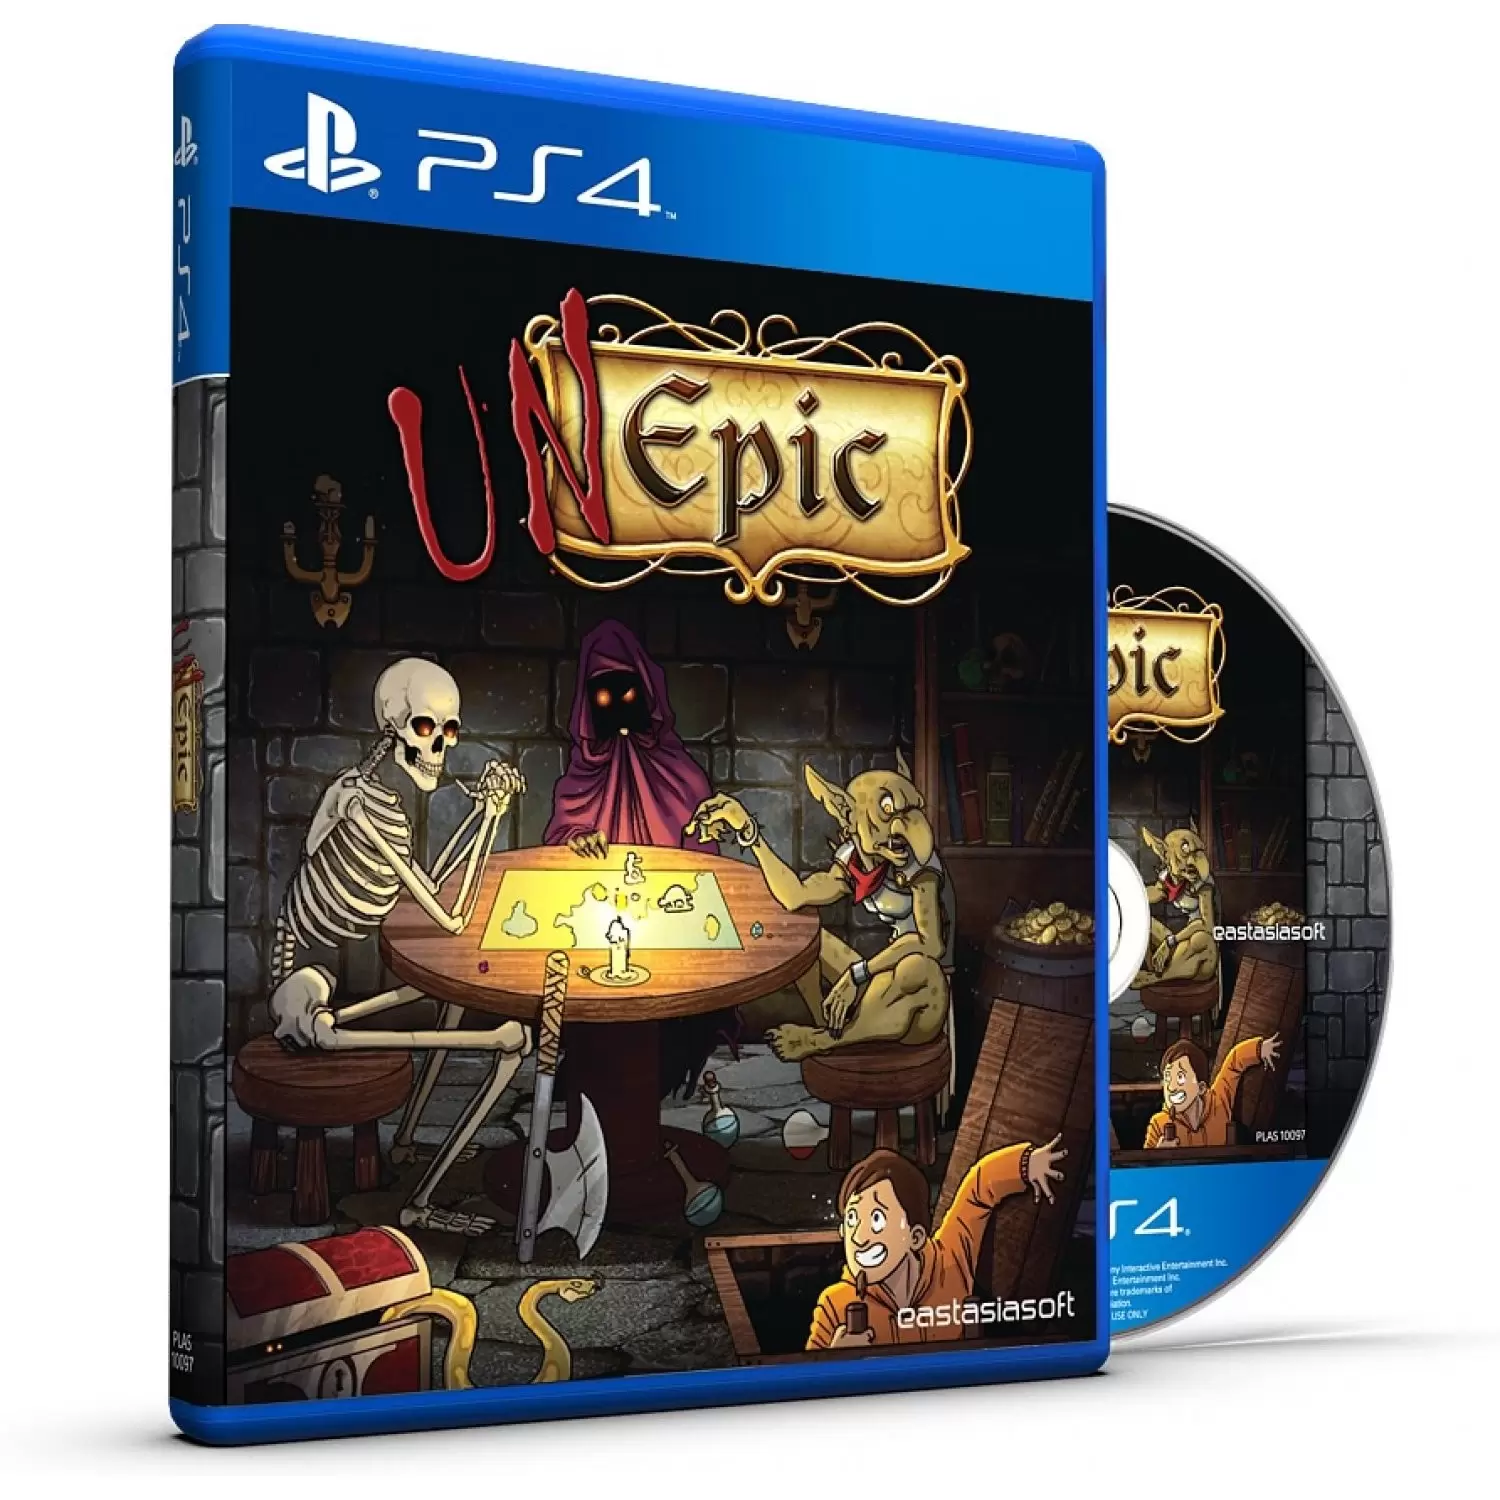 PS4 Games - UnEpic